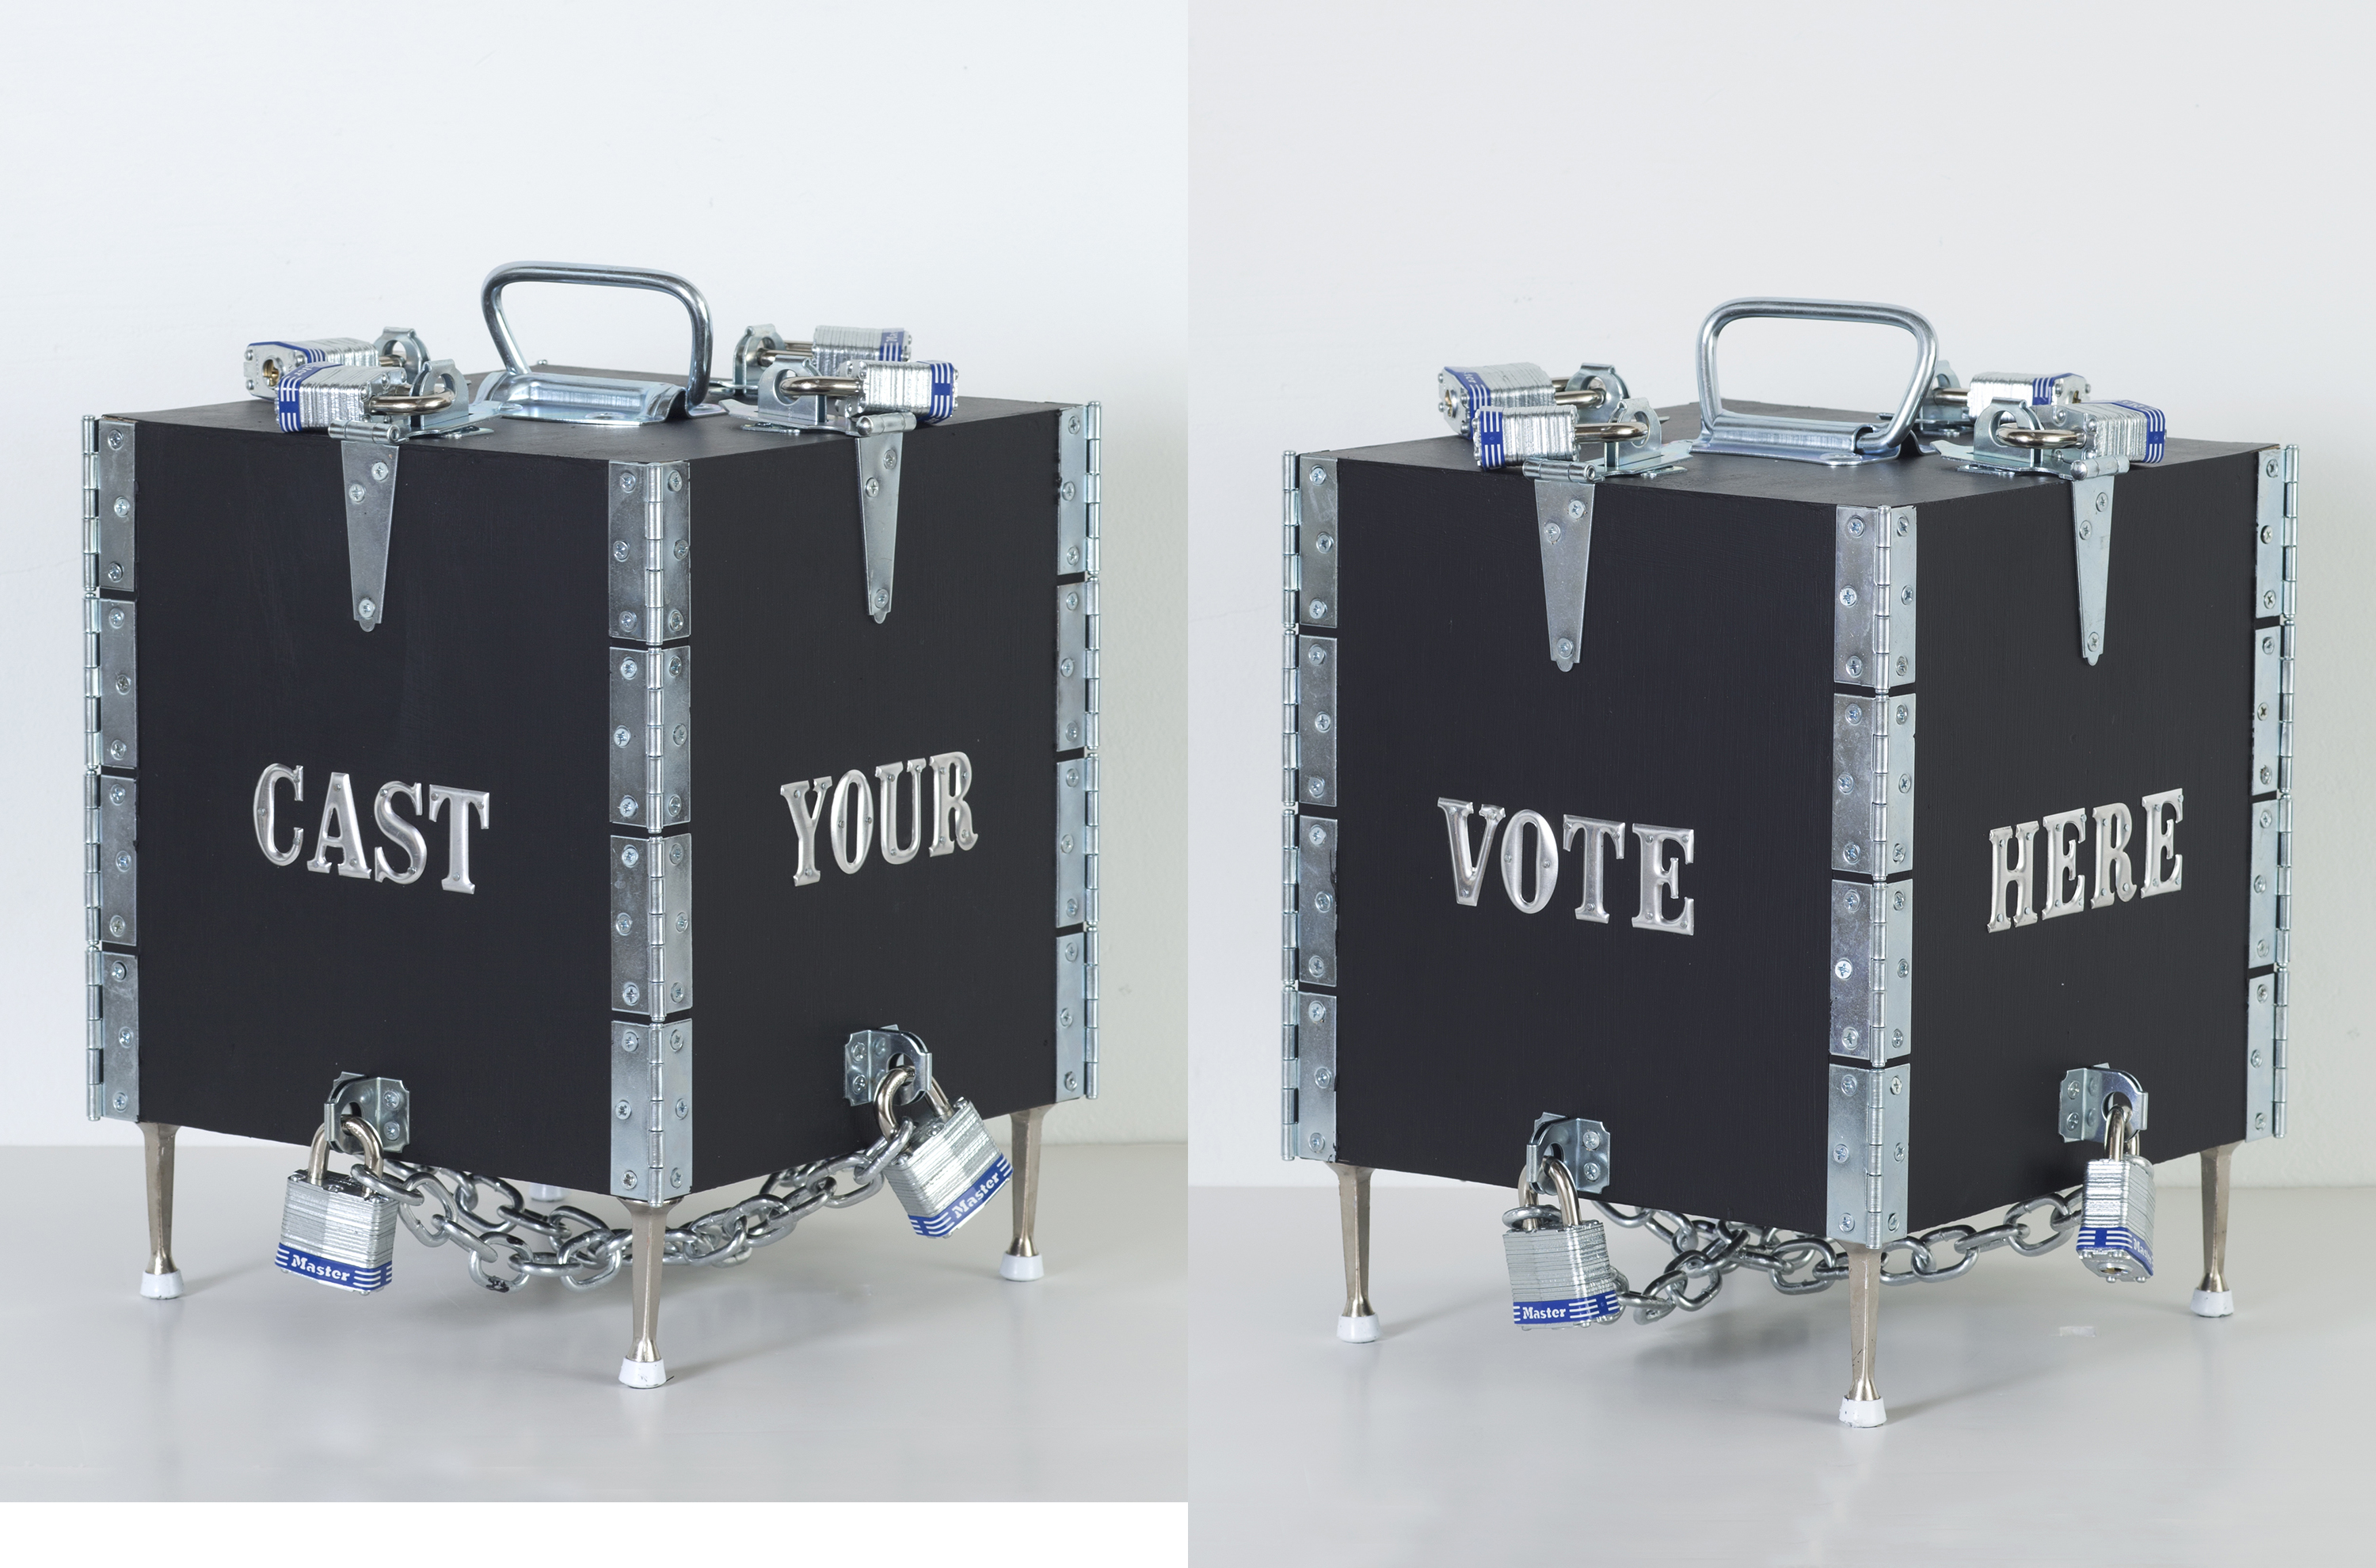 BALLOT BOX , 2019 | Cube Wood Box with galvanized hardware and lettering | 13” x 11” x 11"